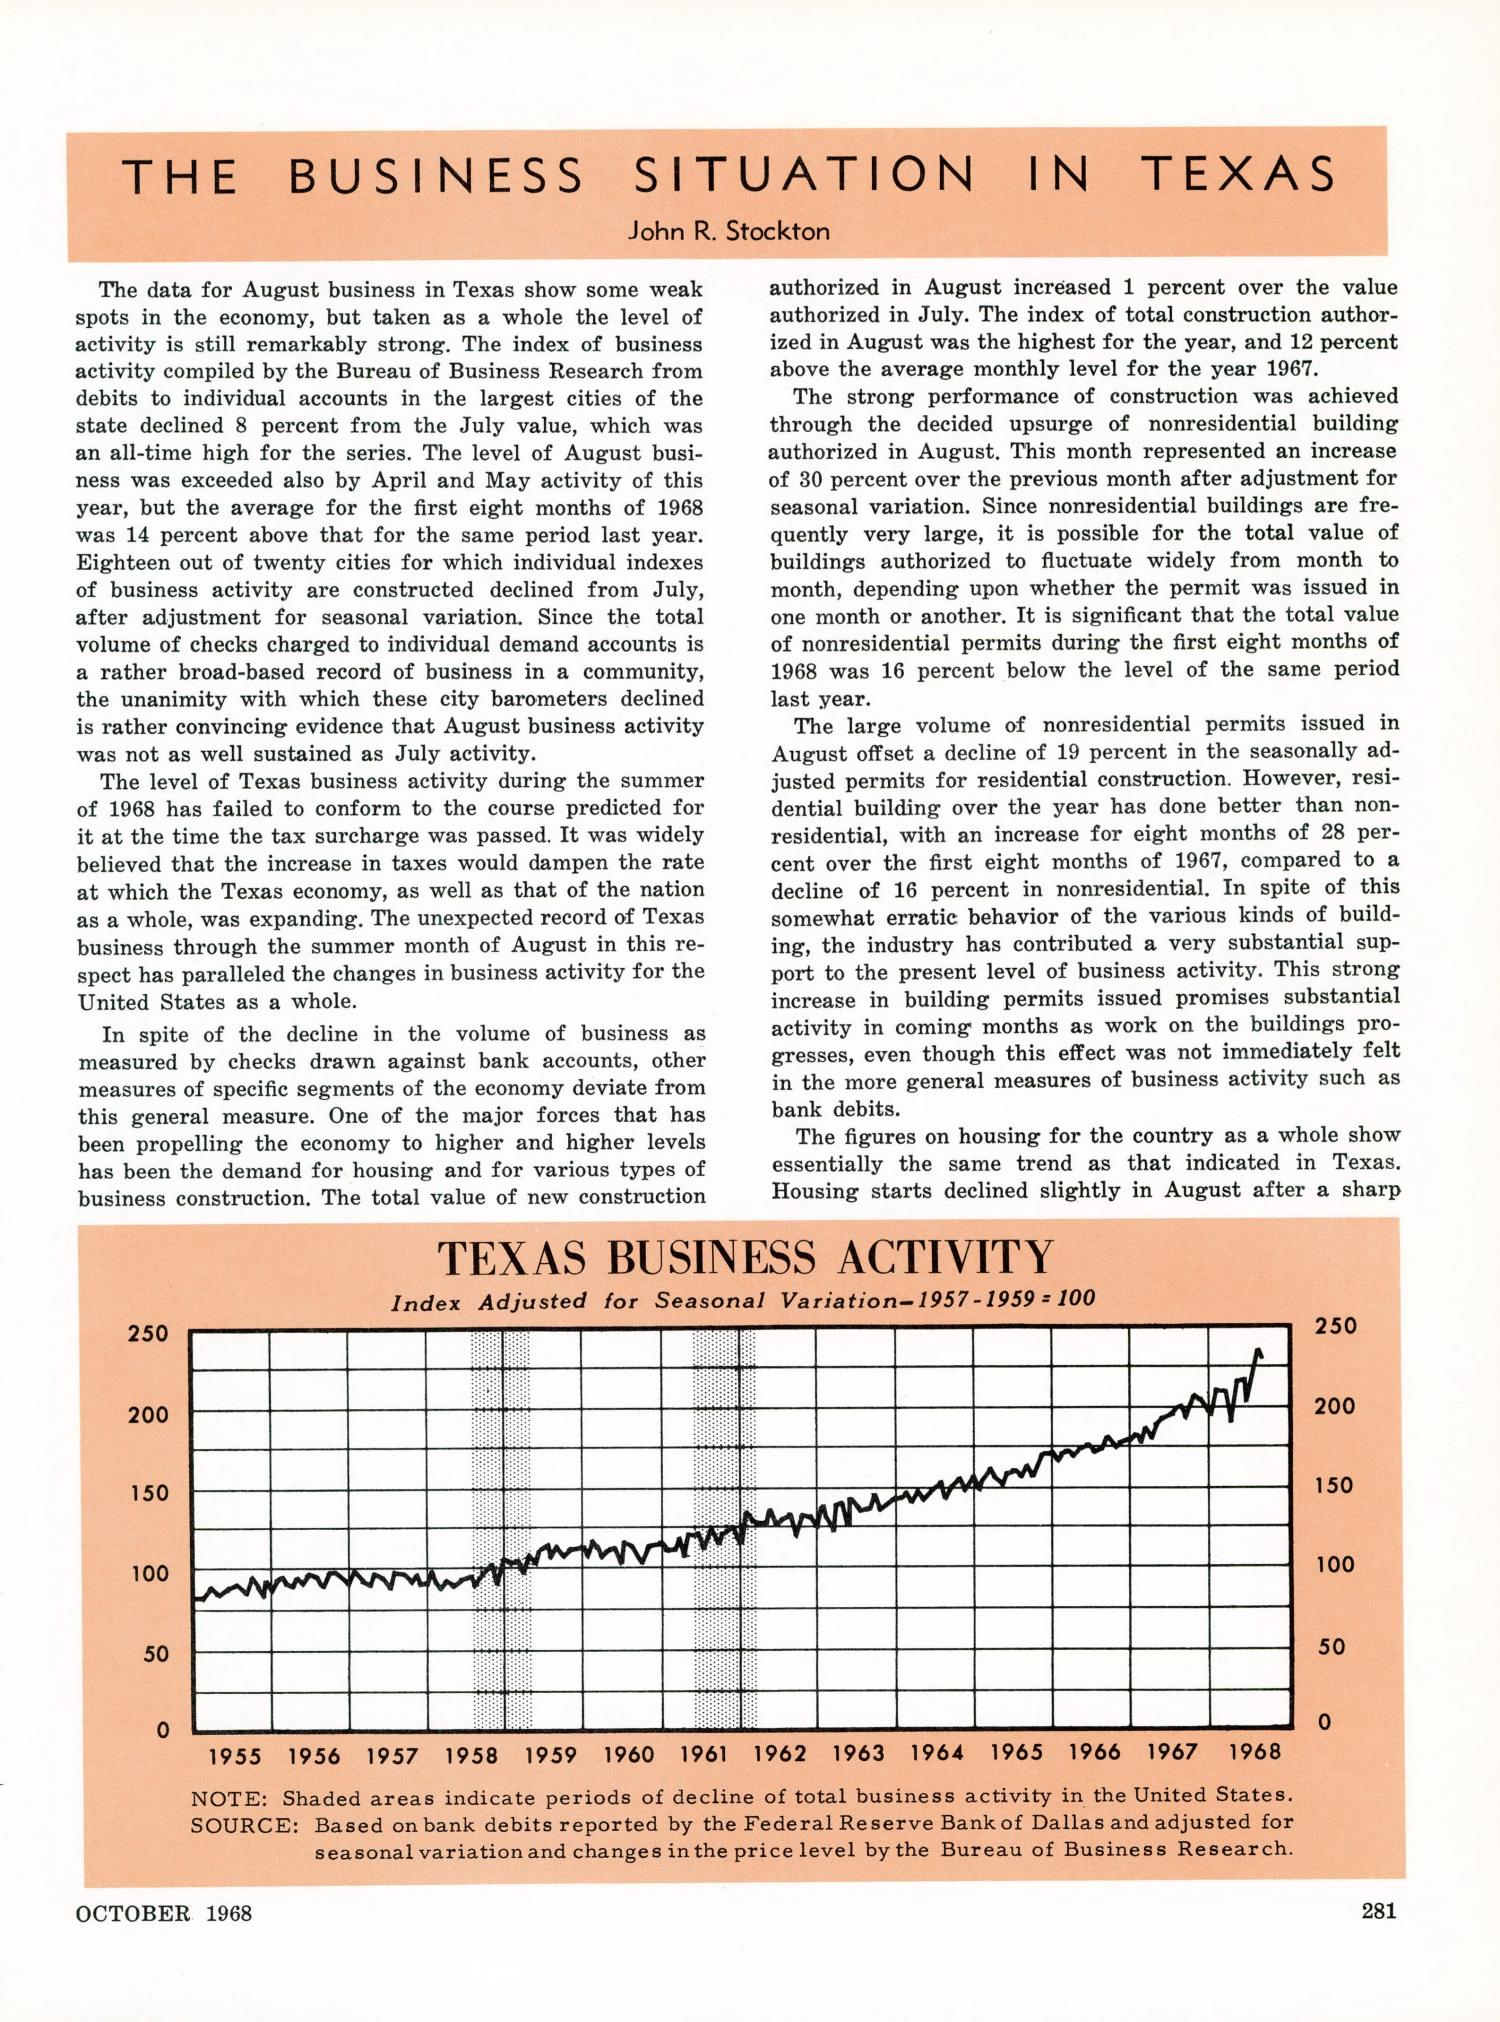 Texas Business Review, Volume 42, Issue 10, October 1968
                                                
                                                    281
                                                